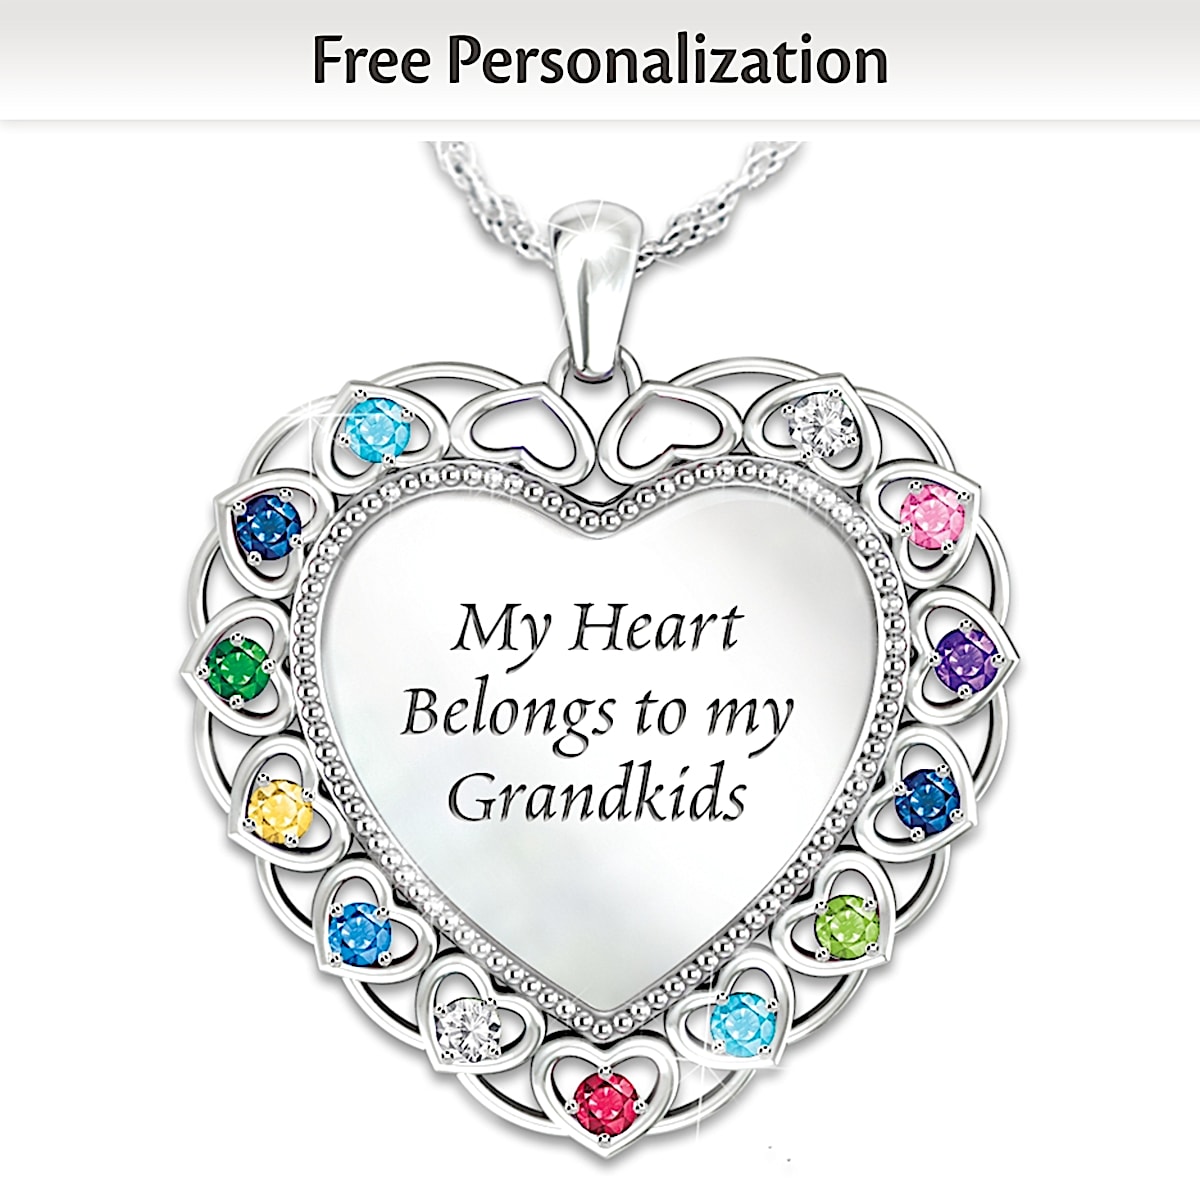 %22My Heart Belongs To My Grandkids%22 Personalized Necklace